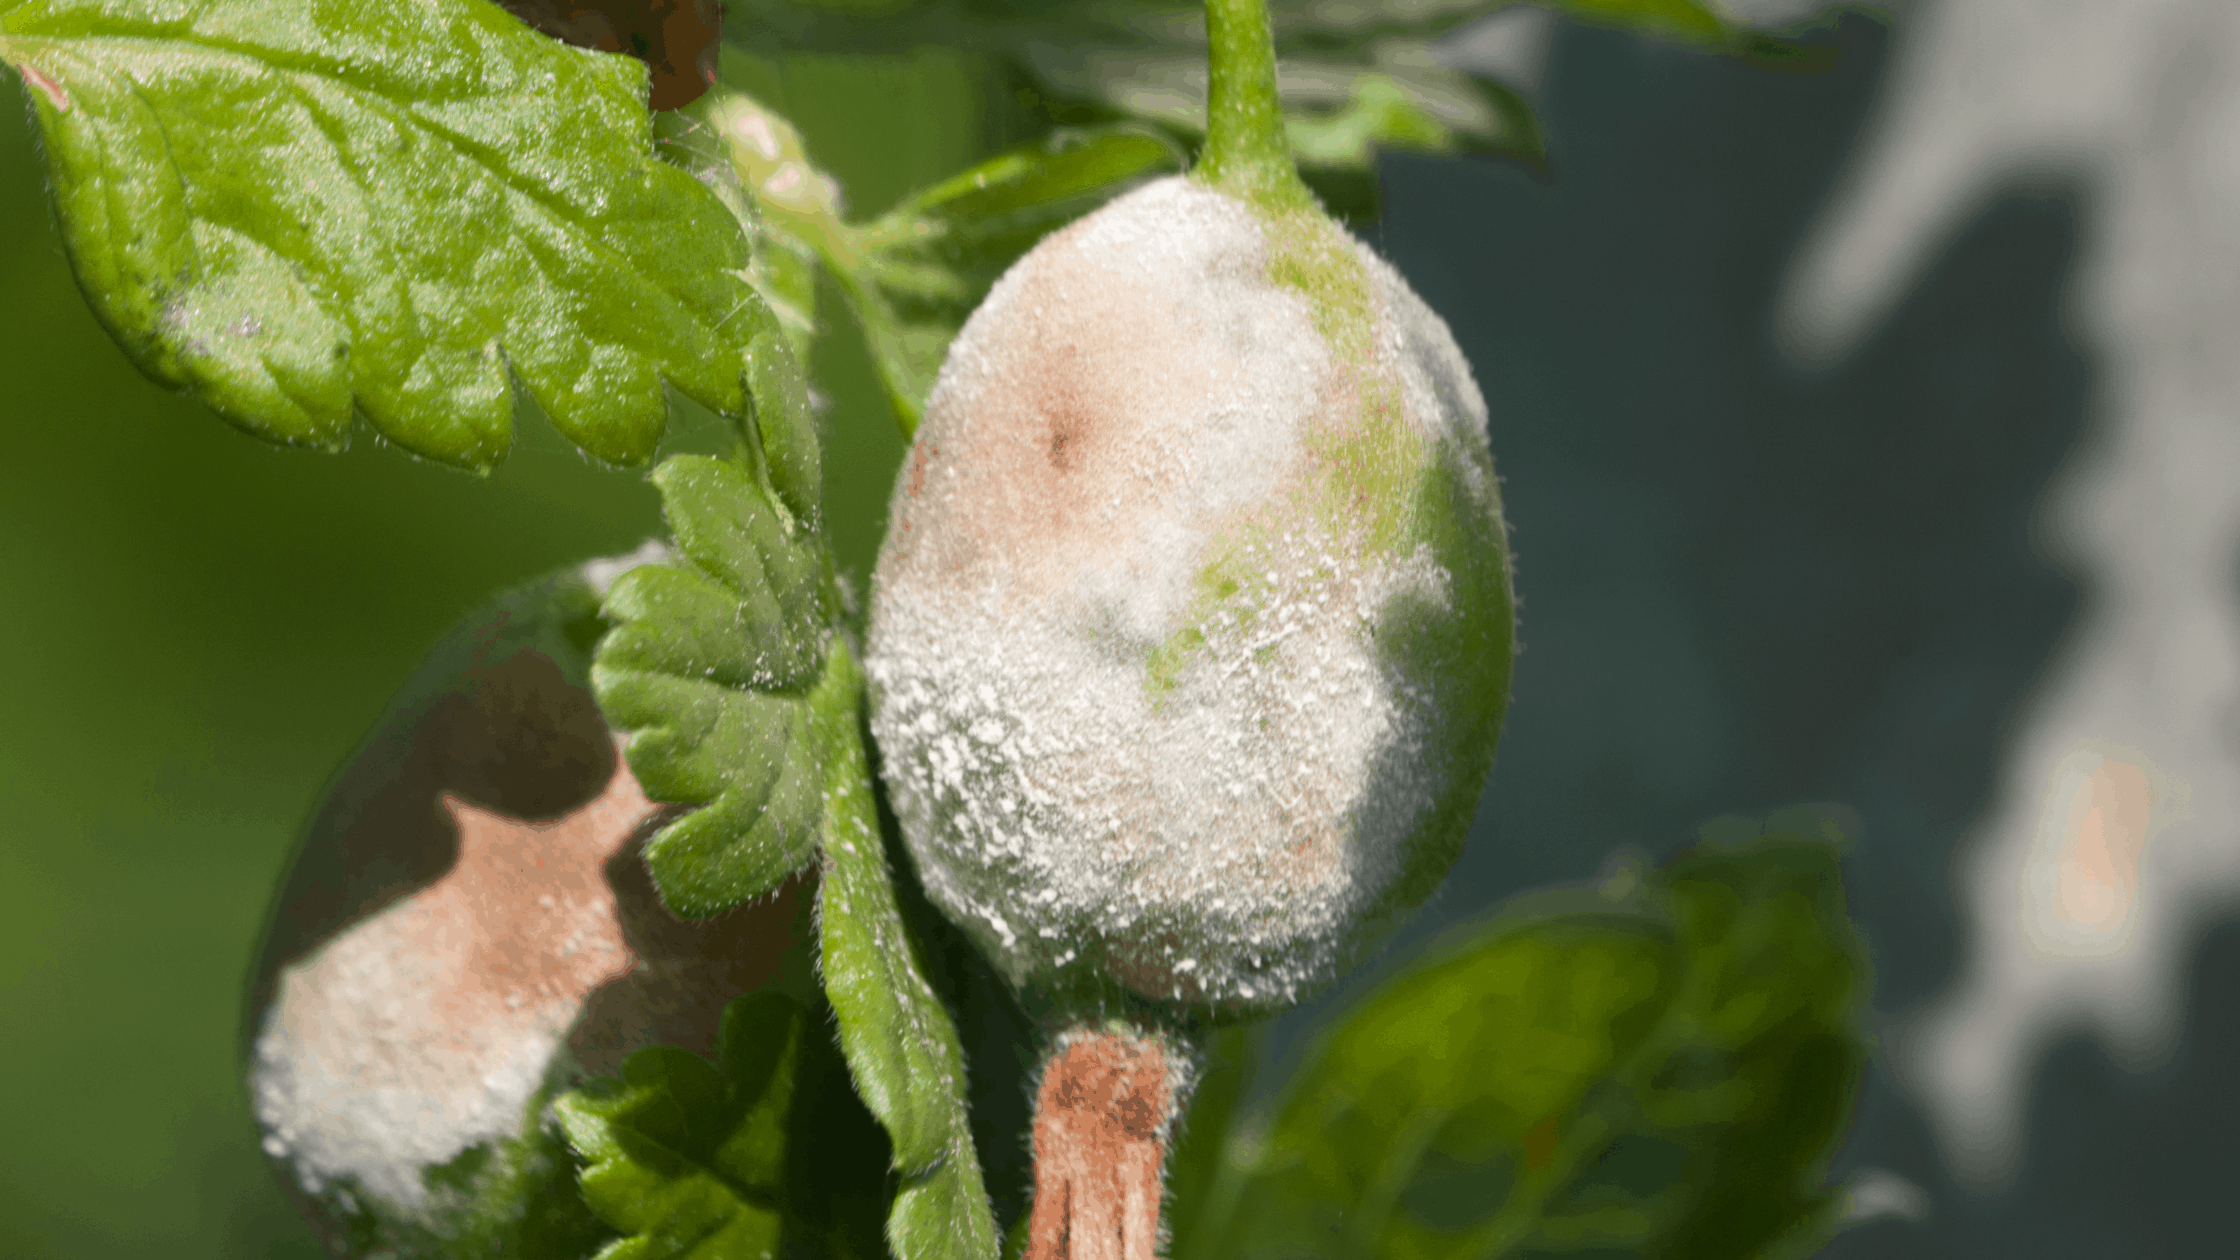 How to Deal with Mold & Mildew on your Vegetable Plants